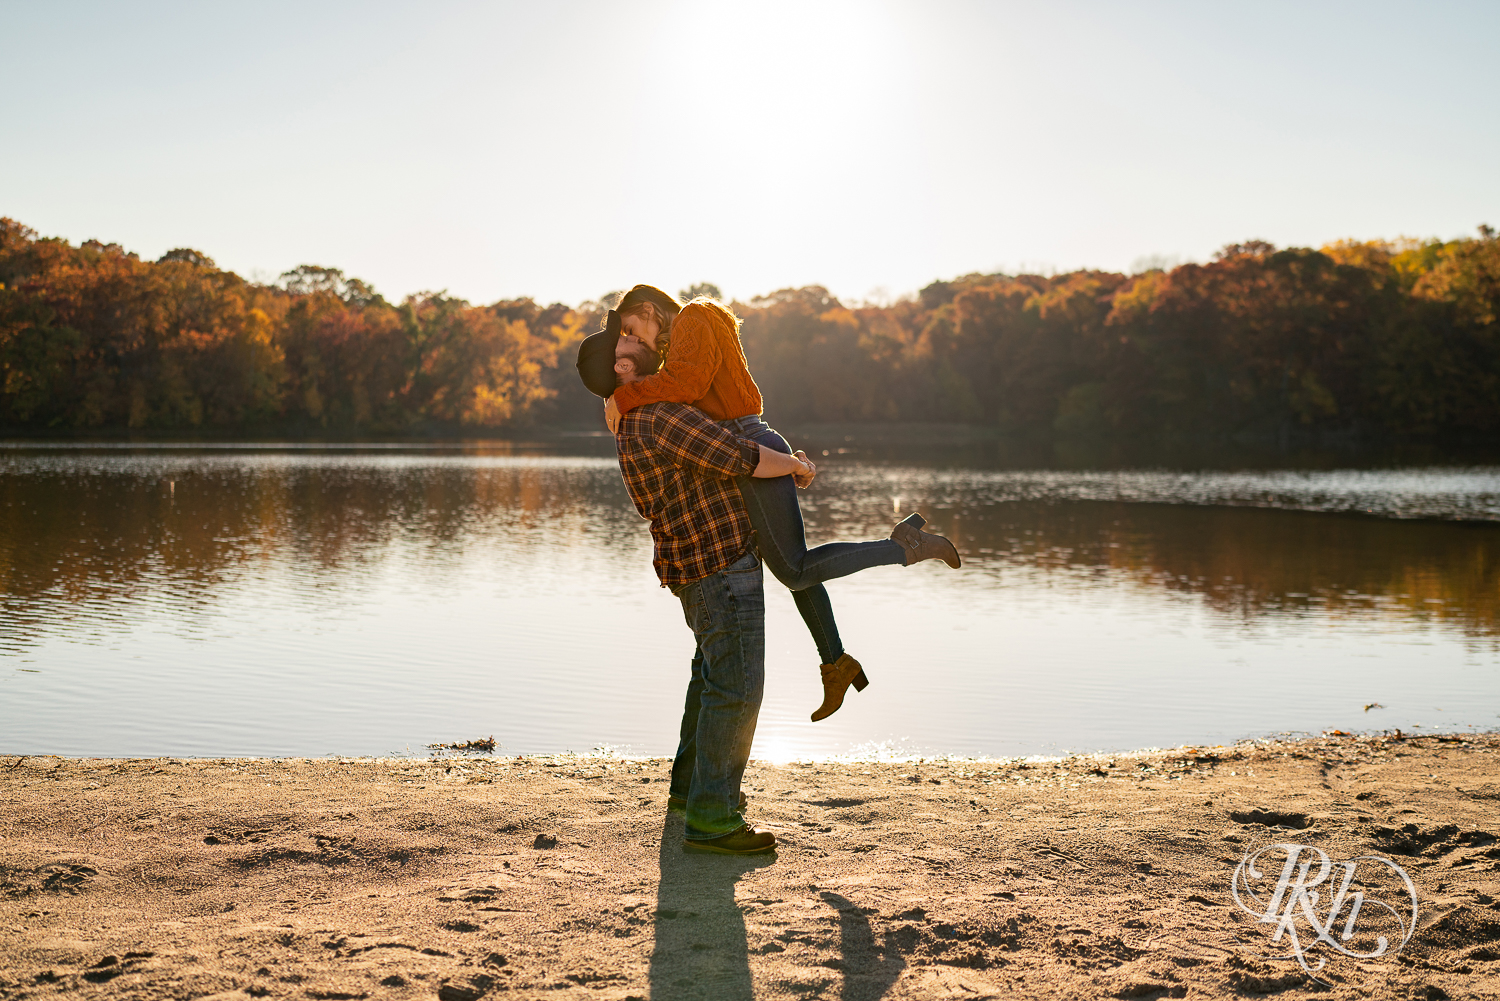 Man in flannel lifting and kissing woman in jeans and sweater on beach during sunset in Eagan, Minnesota.